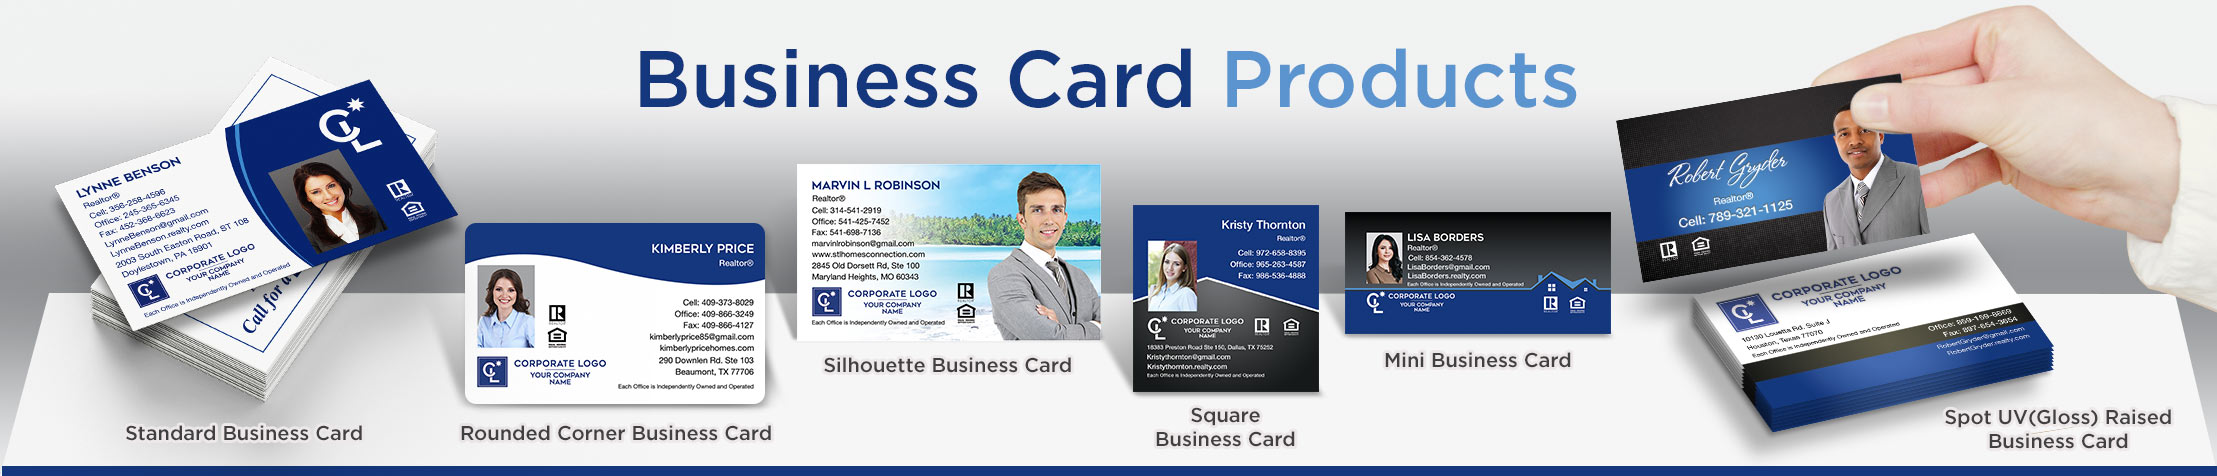 Coldwell Banker Real Estate Business Card Products - Coldwell Banker  - Unique, Custom Business Cards Printed on Quality Stock with Creative Designs for Realtors | BestPrintBuy.com